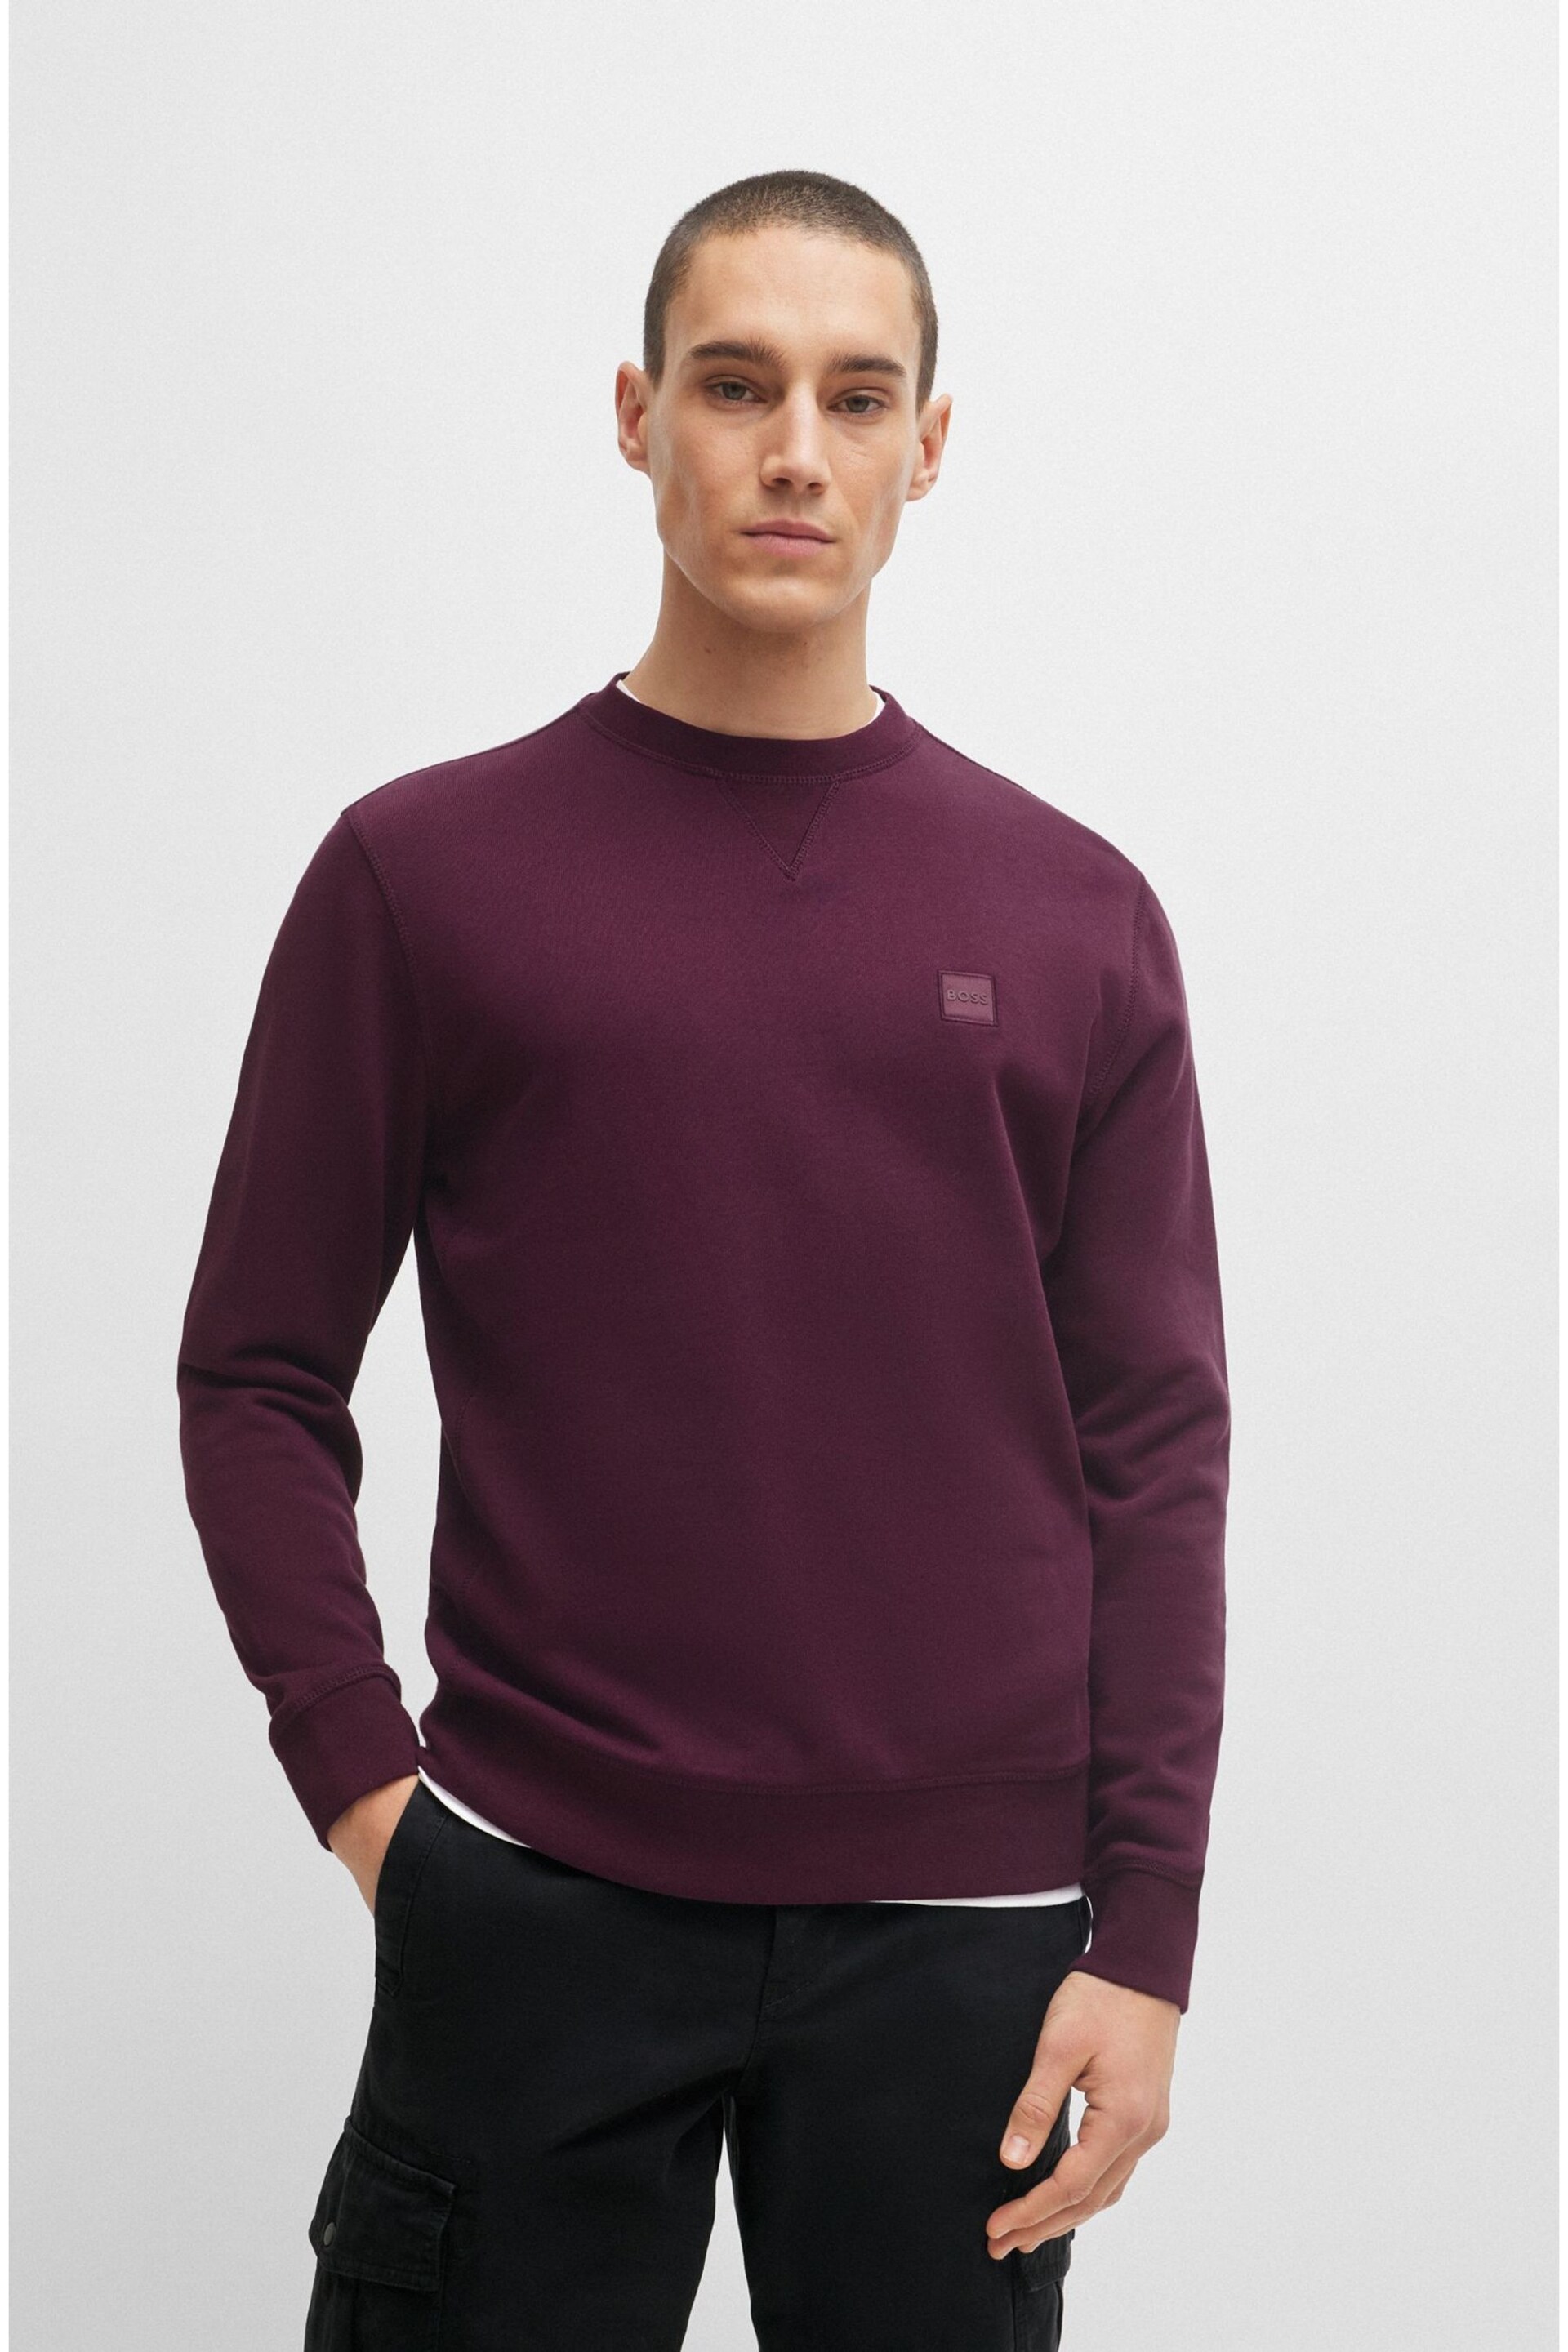 BOSS Purple Cotton Terry Relaxed Fit Sweatshirt - Image 1 of 5